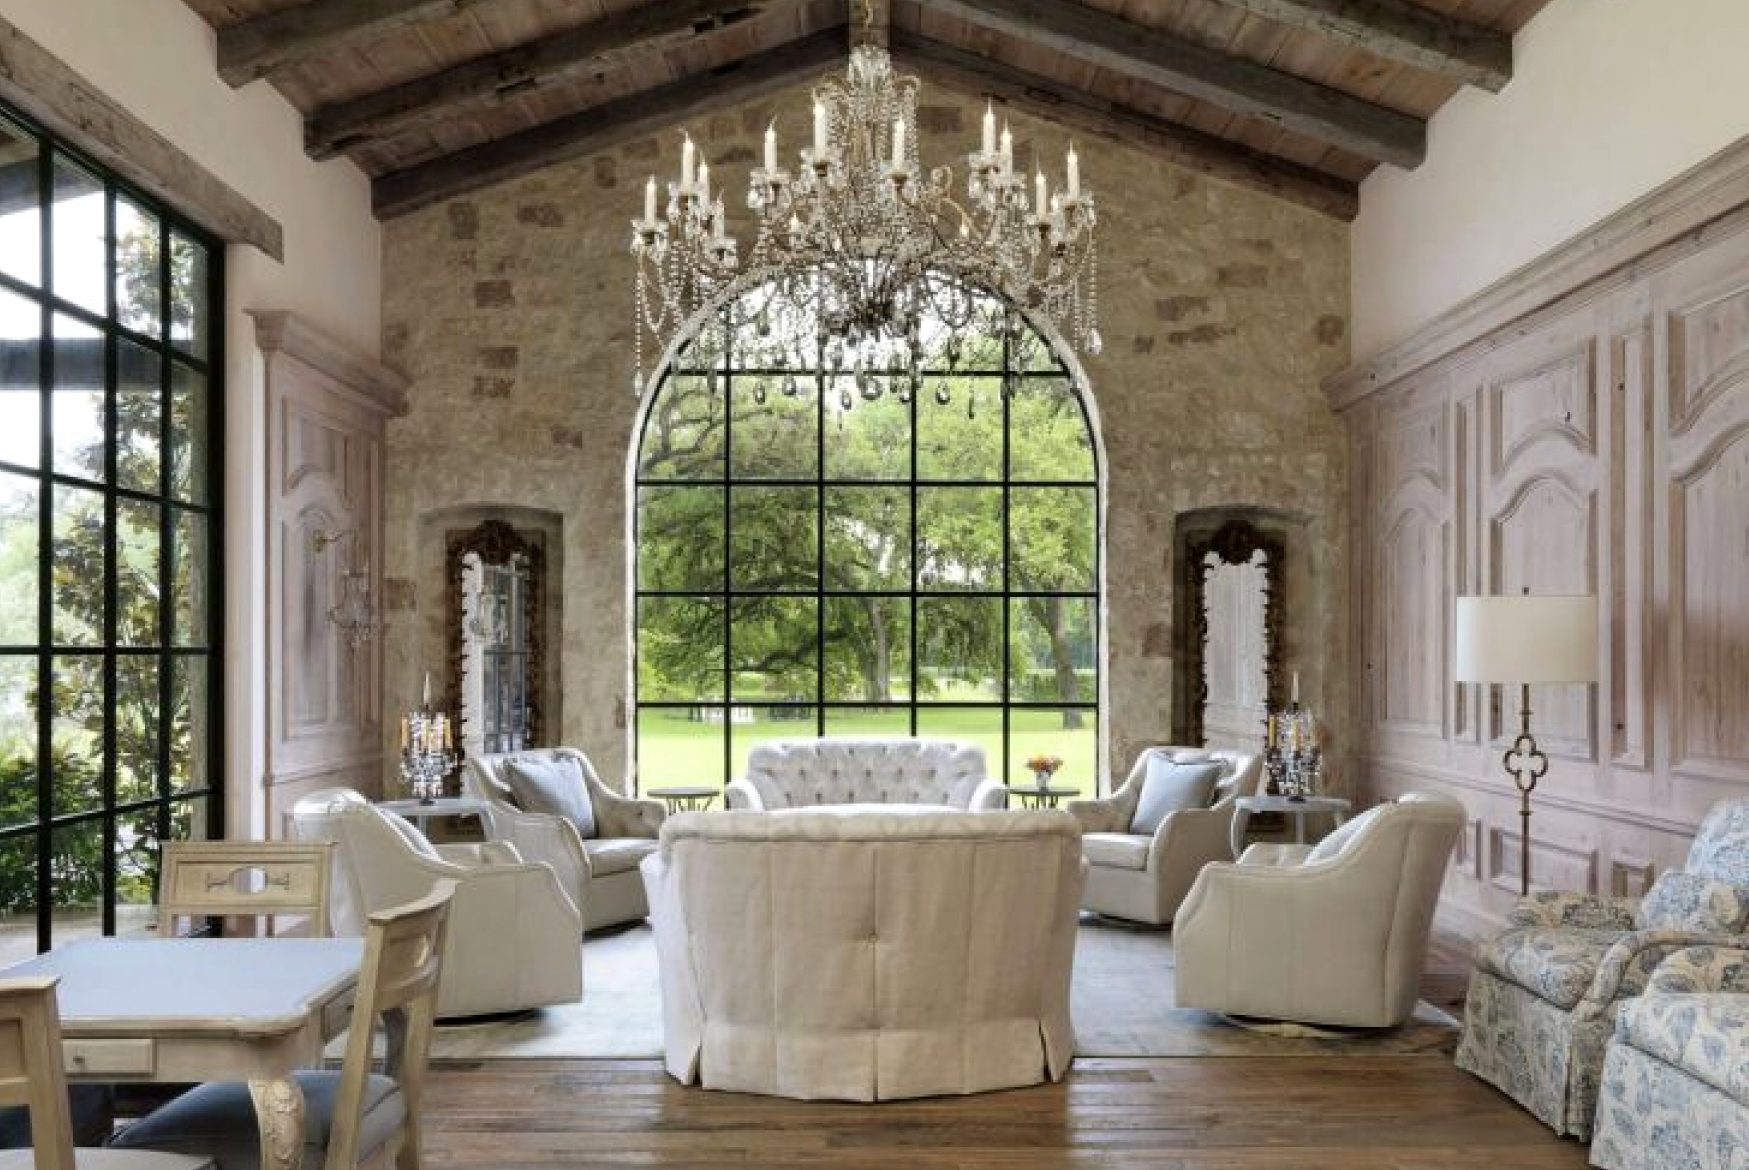 Provence Style Interior Designs Are More Than Inviting